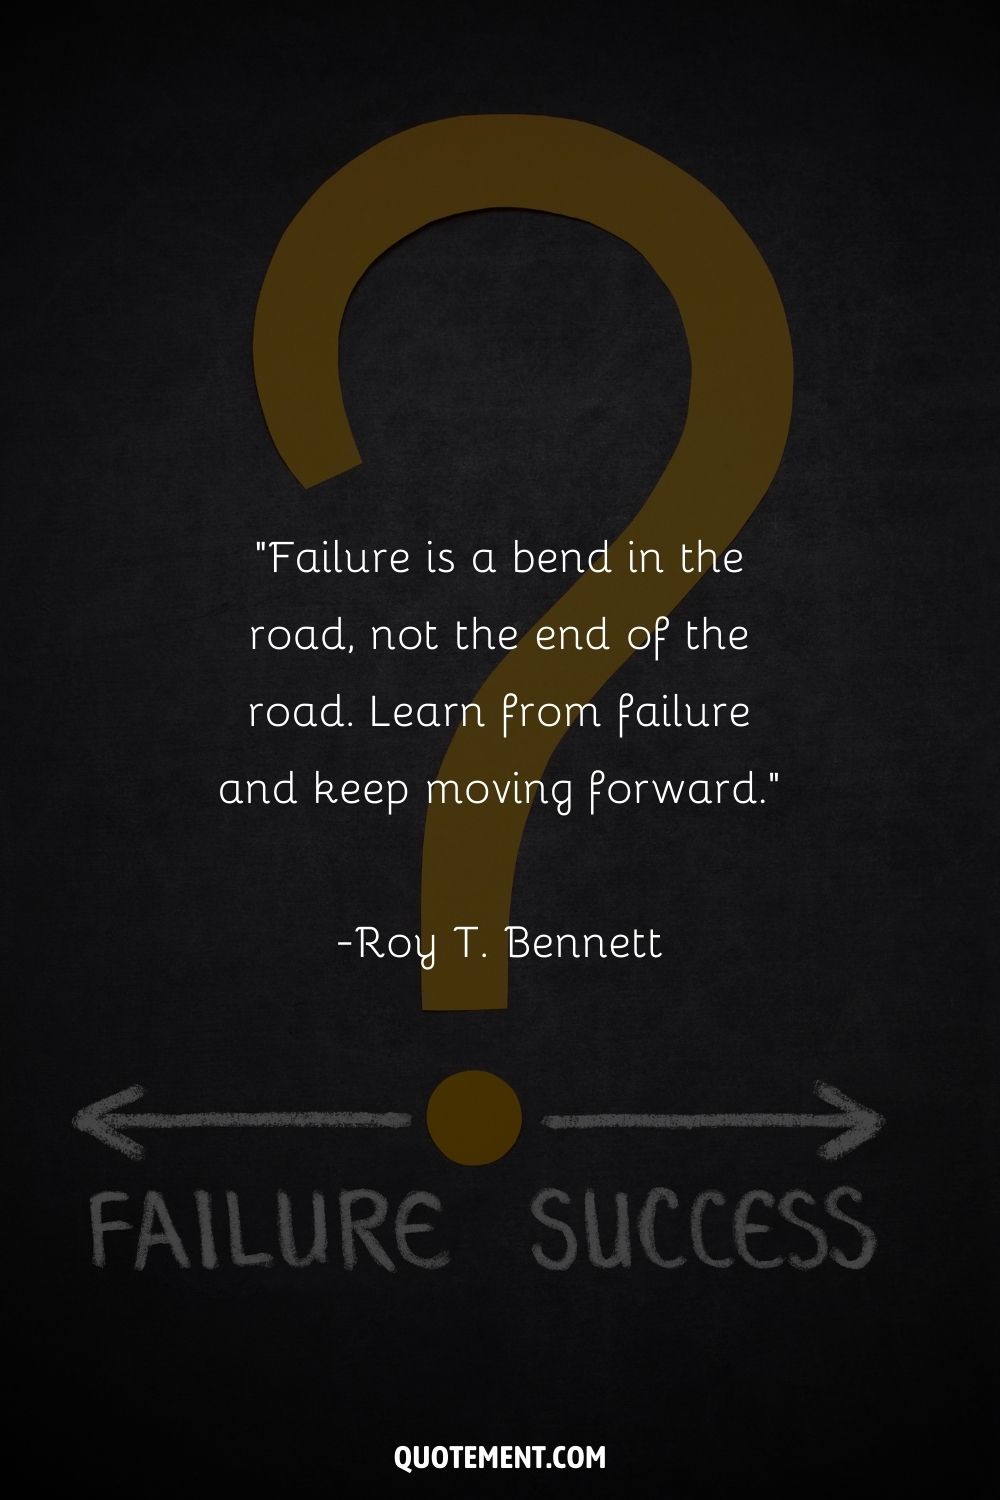 “Failure is a bend in the road, not the end of the road. Learn from failure and keep moving forward.” ― Roy T. Bennett